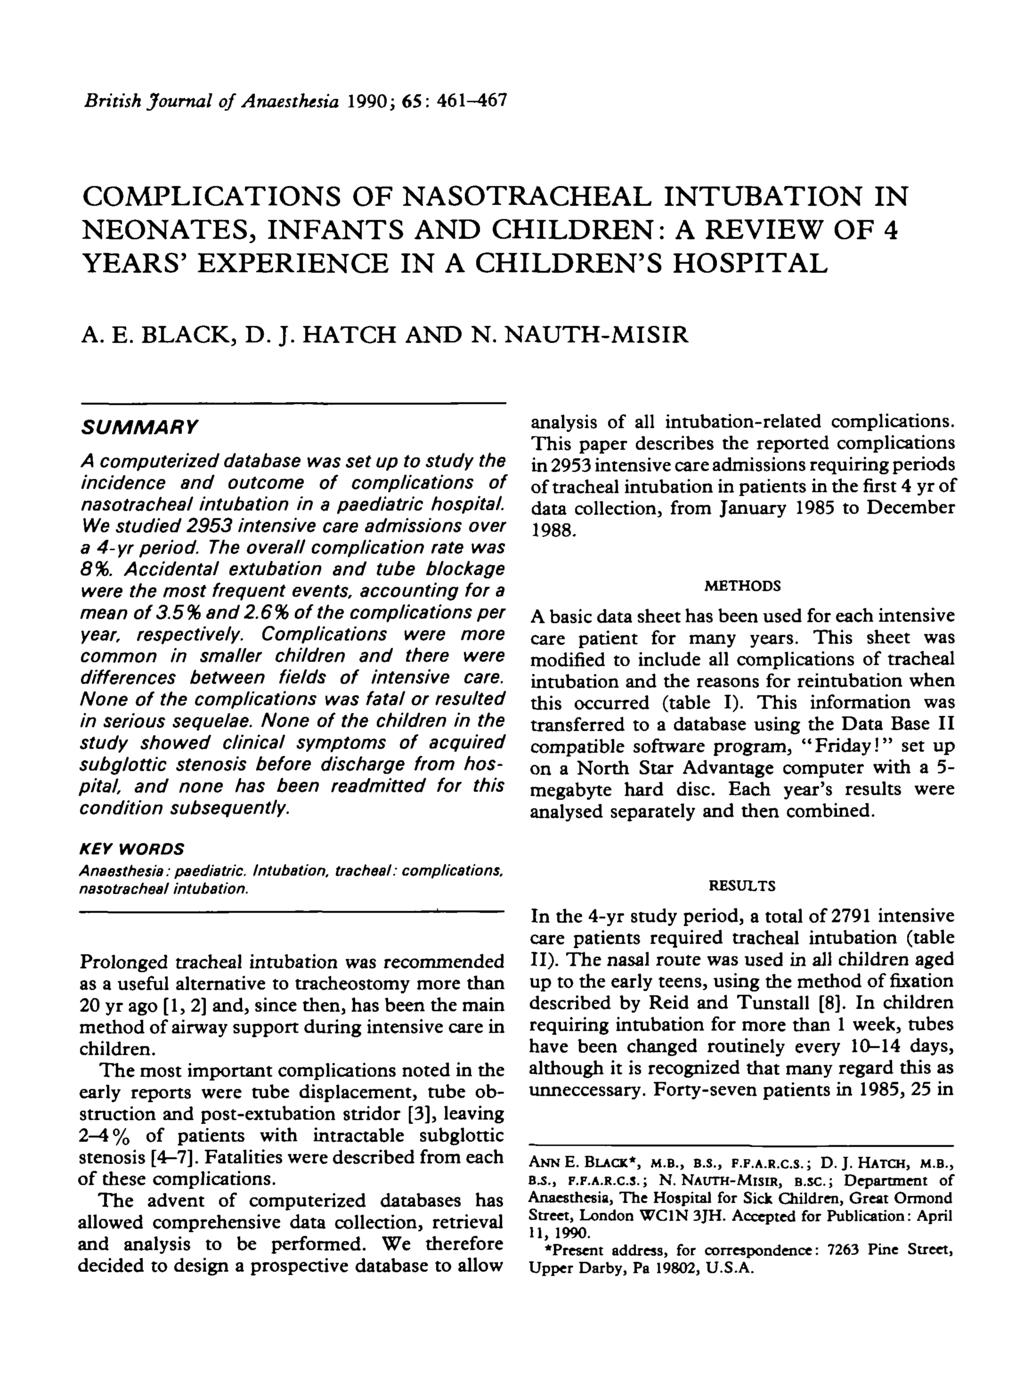 British Journal of Anaesthesia 990; 65: 46-467 COMPLICATIONS OF NASOTRACHEAL INTUBATION IN NEONATES, INFANTS AND CHILDREN: A REVIEW OF 4 YEARS' EXPERIENCE IN A CHILDREN'S HOSPITAL A. E. BLACK, D. J. HATCH AND N.